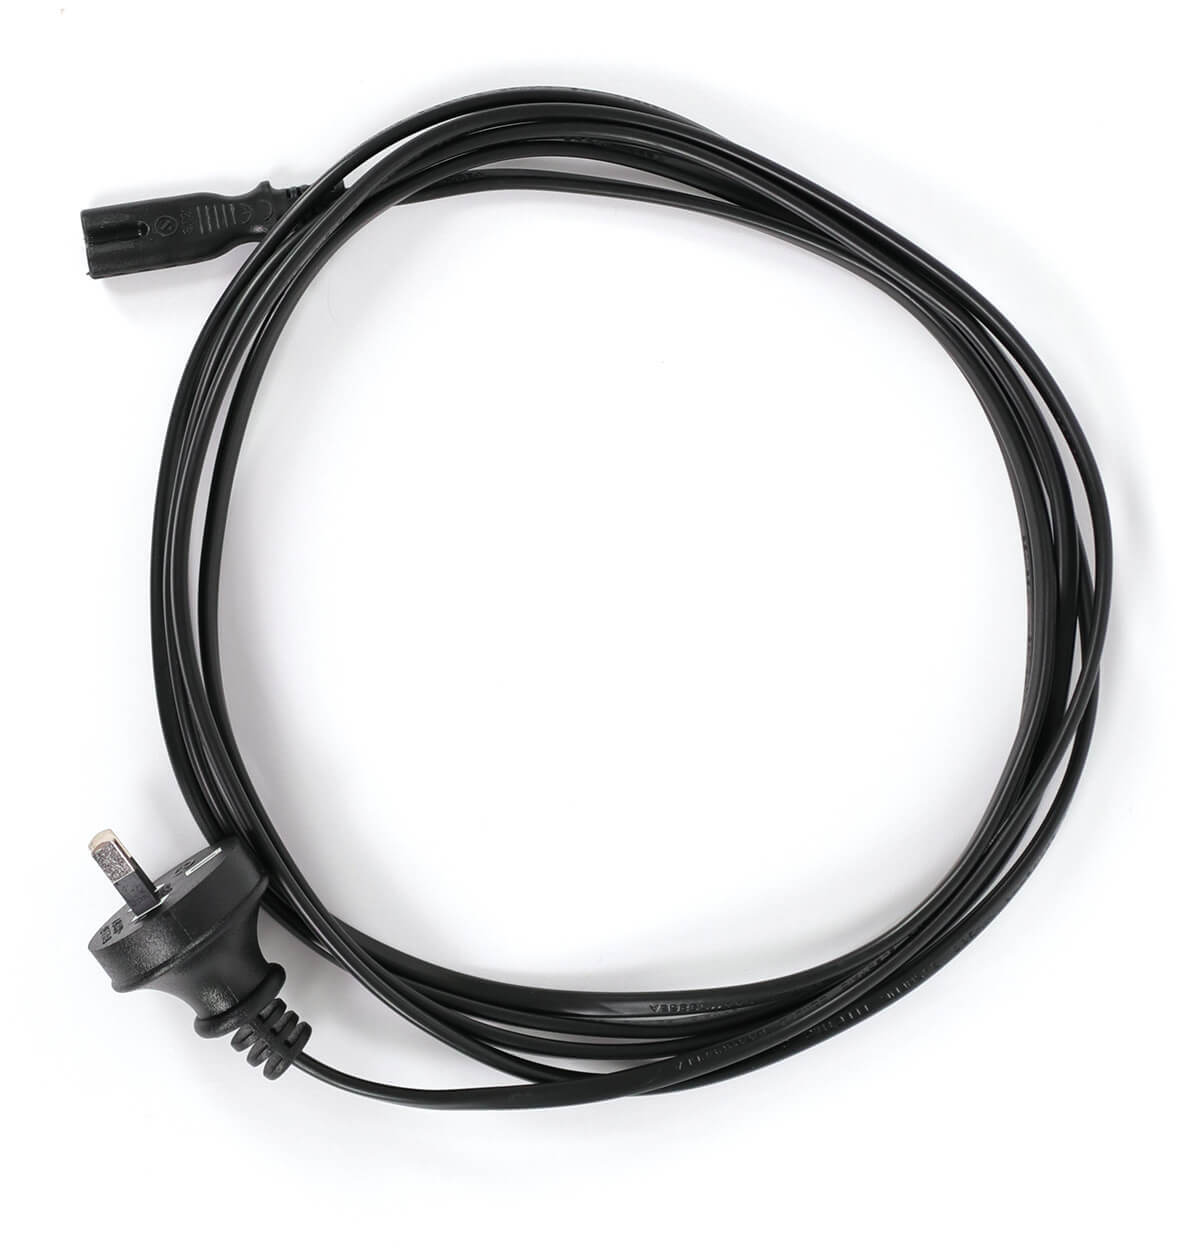 3m Power Cord suitable for Brother Sewing and Embroidery Machines